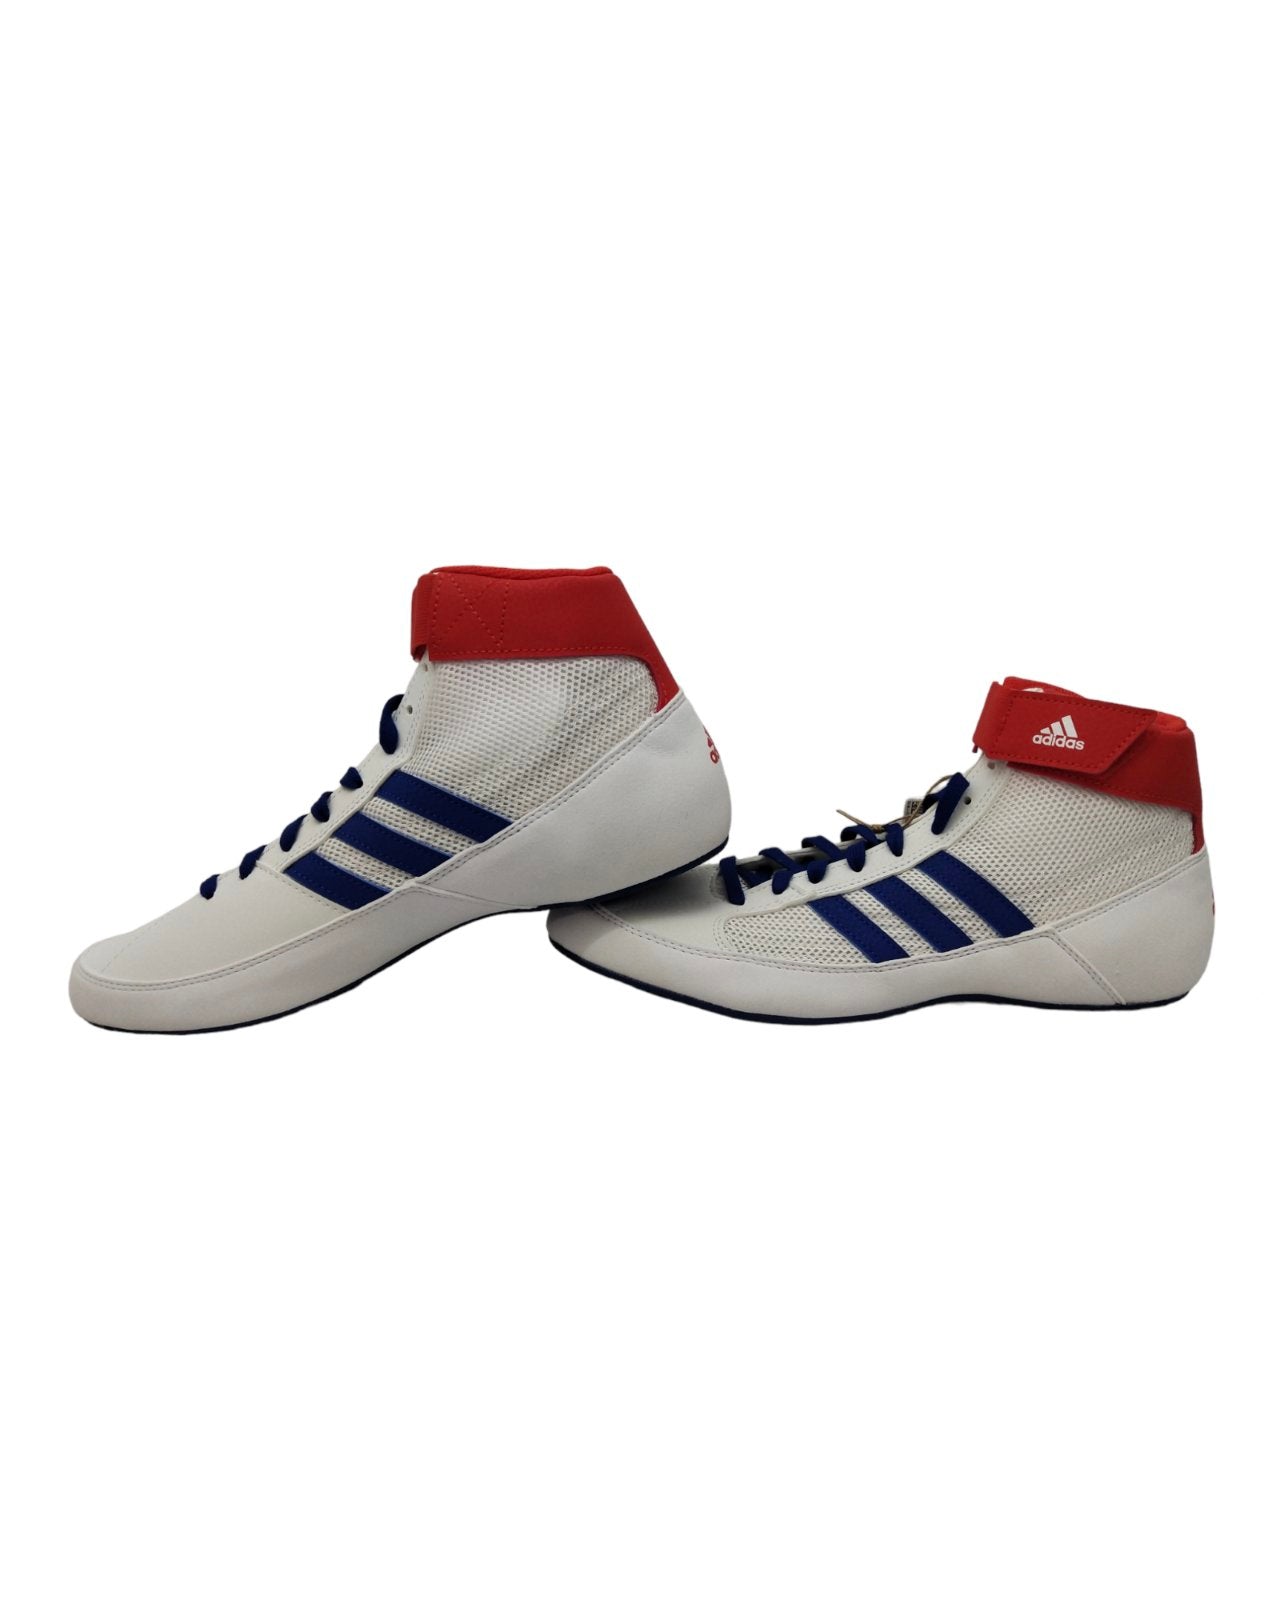 ADIDAS Wrestling Shoes 221-HVC 2 [White/Red/Blue]